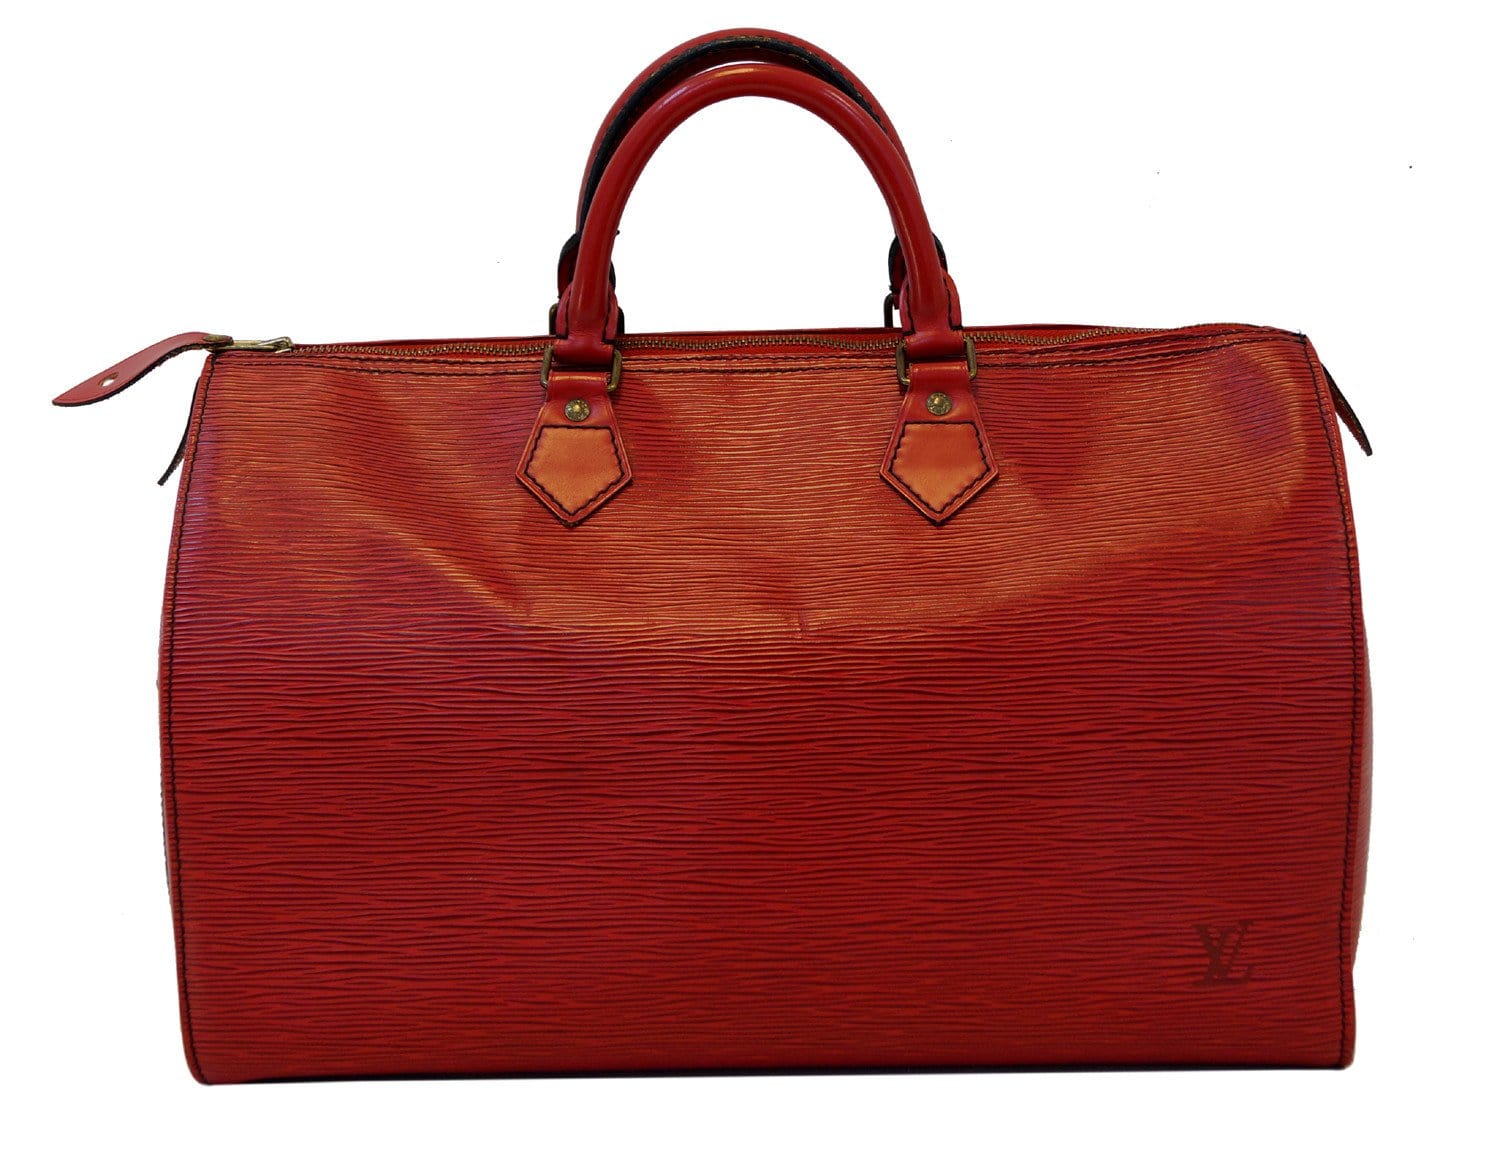 pre.loved] LOUIS VUITTON RED EPI LEATHER SPEEDY 25 In very good